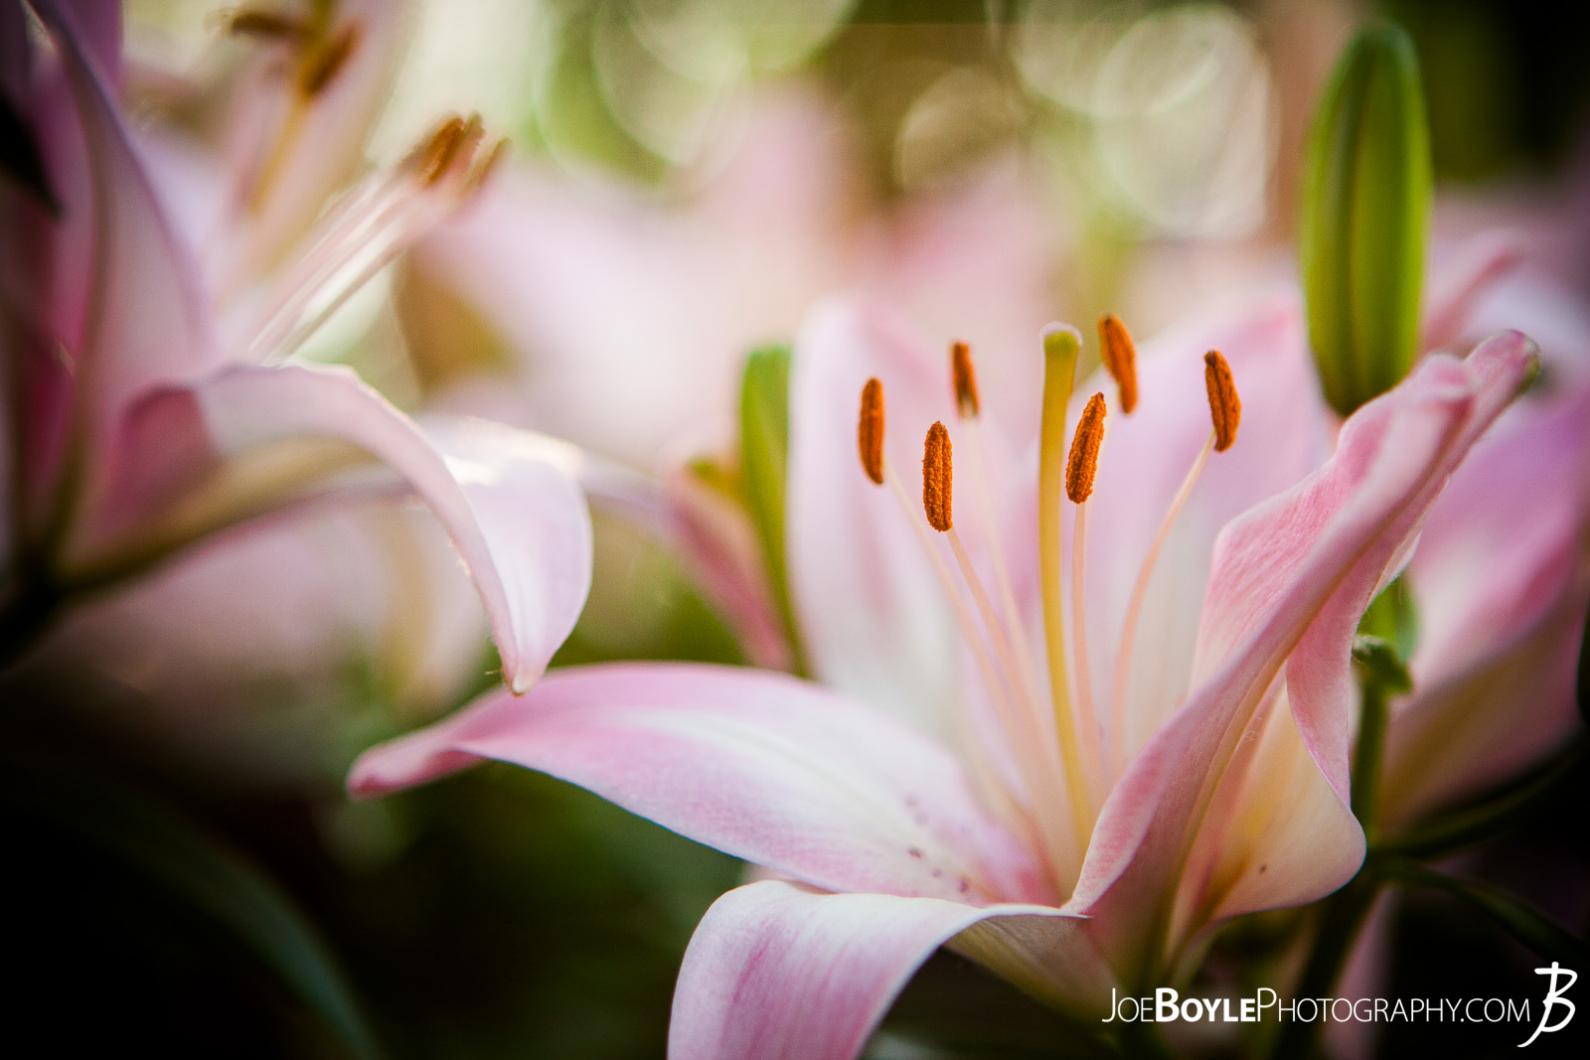 I took this image of these pink lilies on one, sunny afternoon. I walked past these flowers for a few days before finally remembering to bring my camera with me!